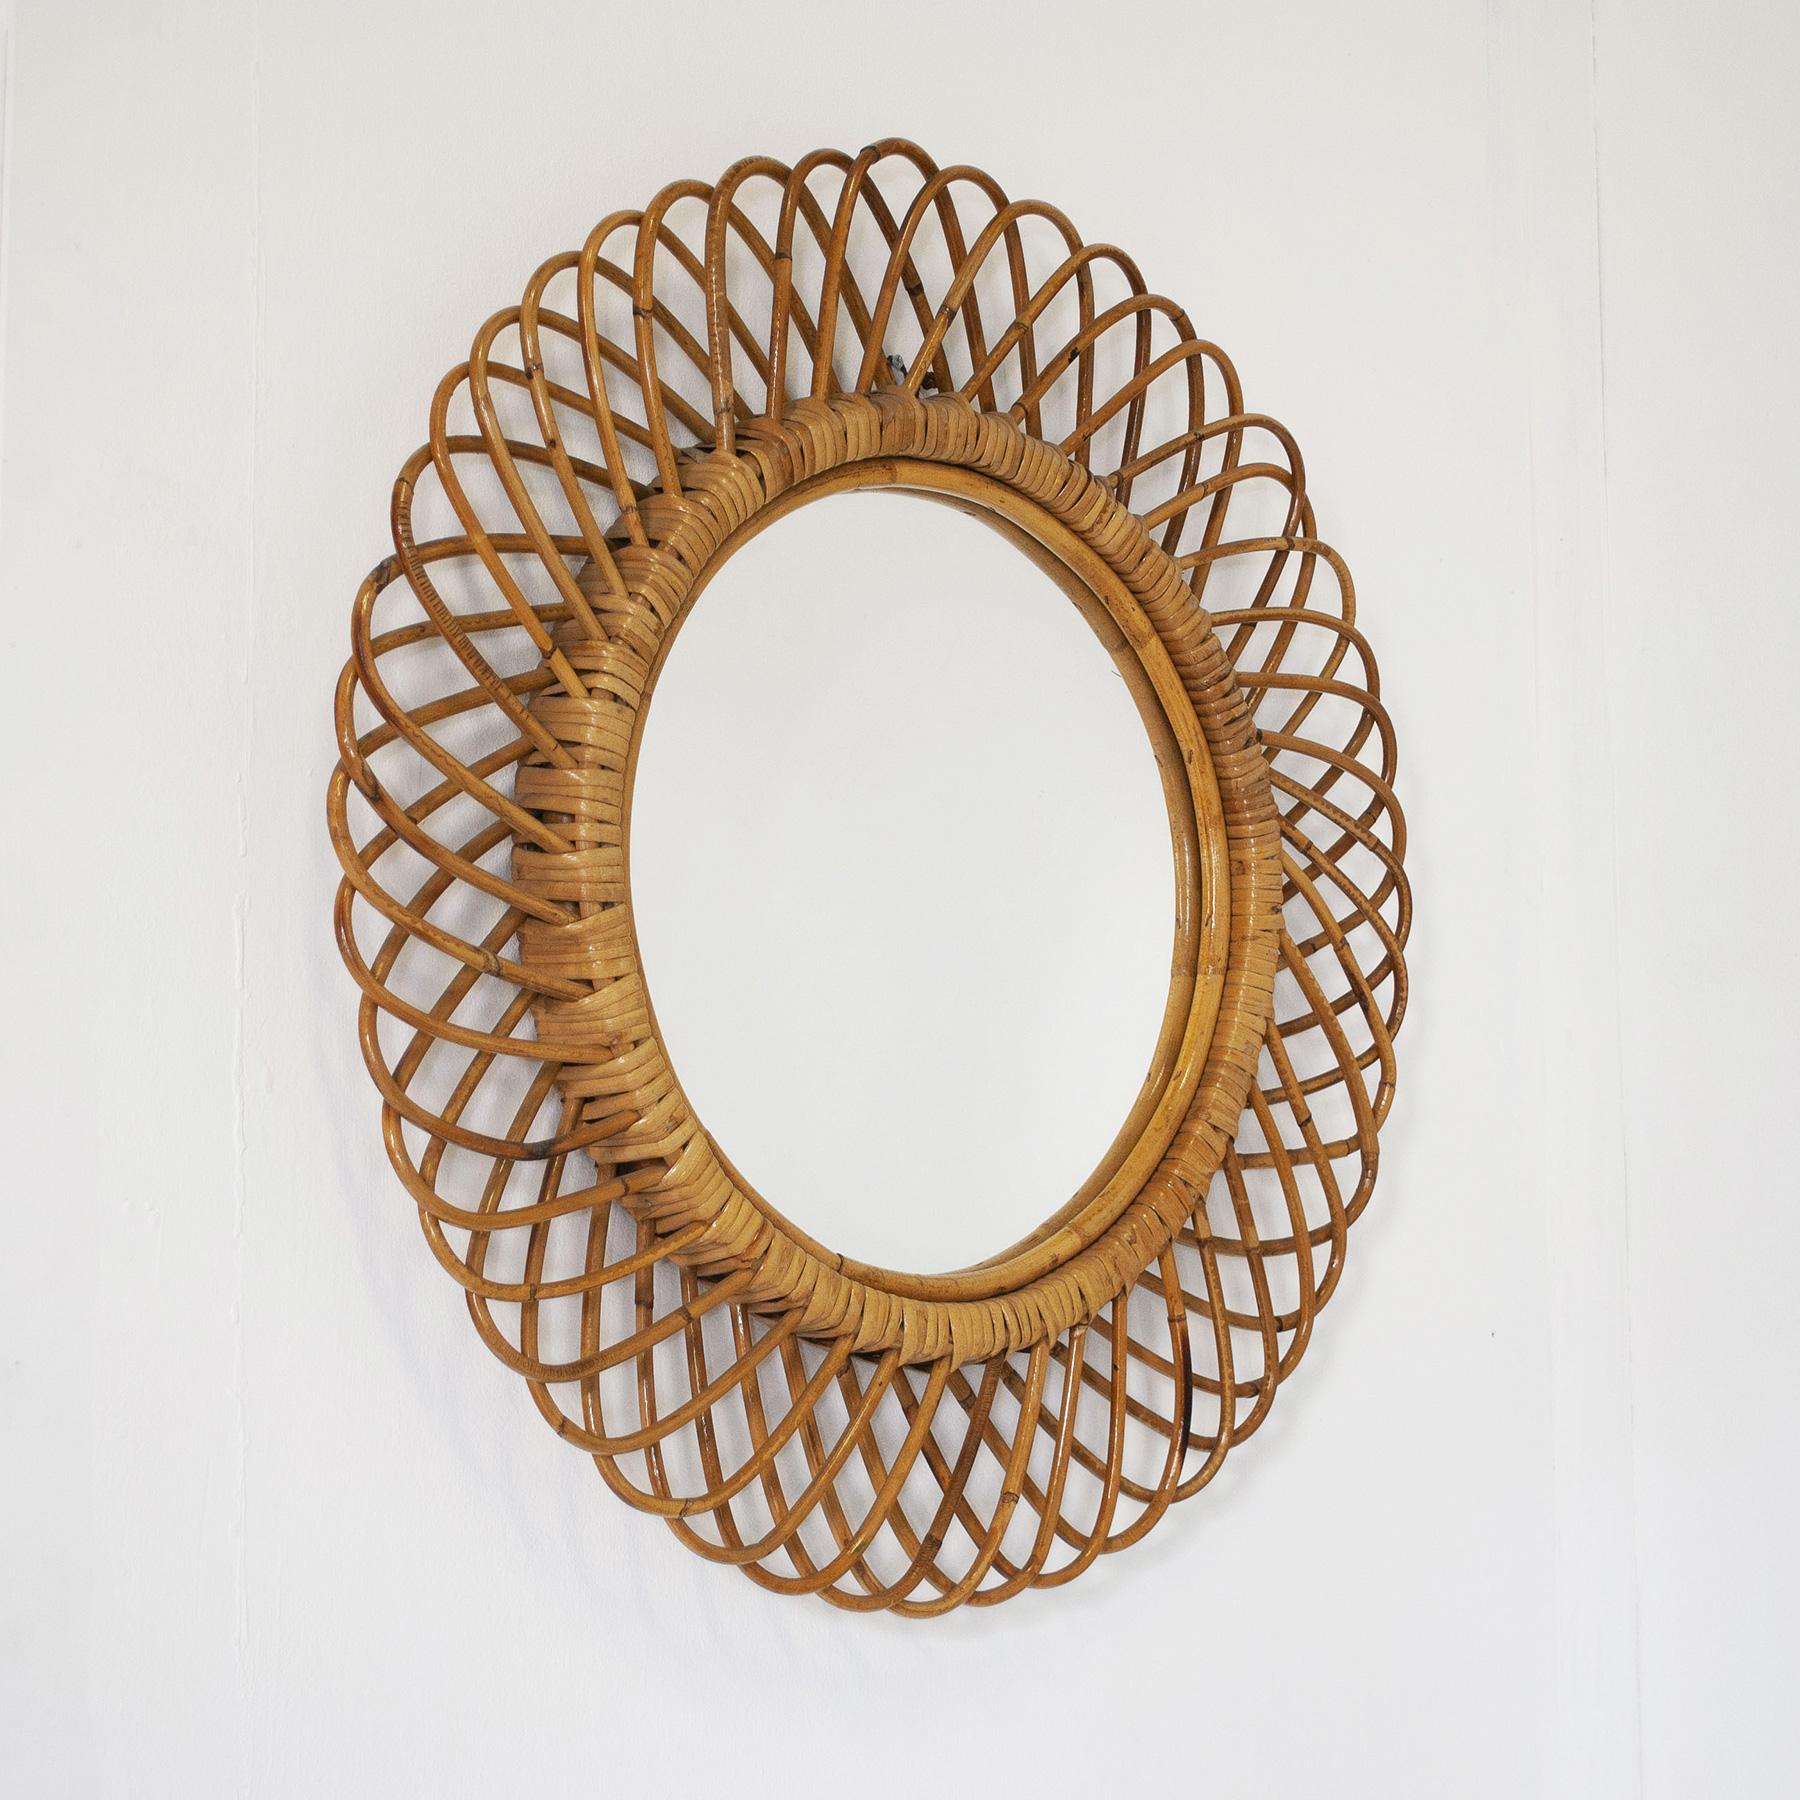 Rattan Italian Round mirror with woven wicker (india cane) frame. For Sale